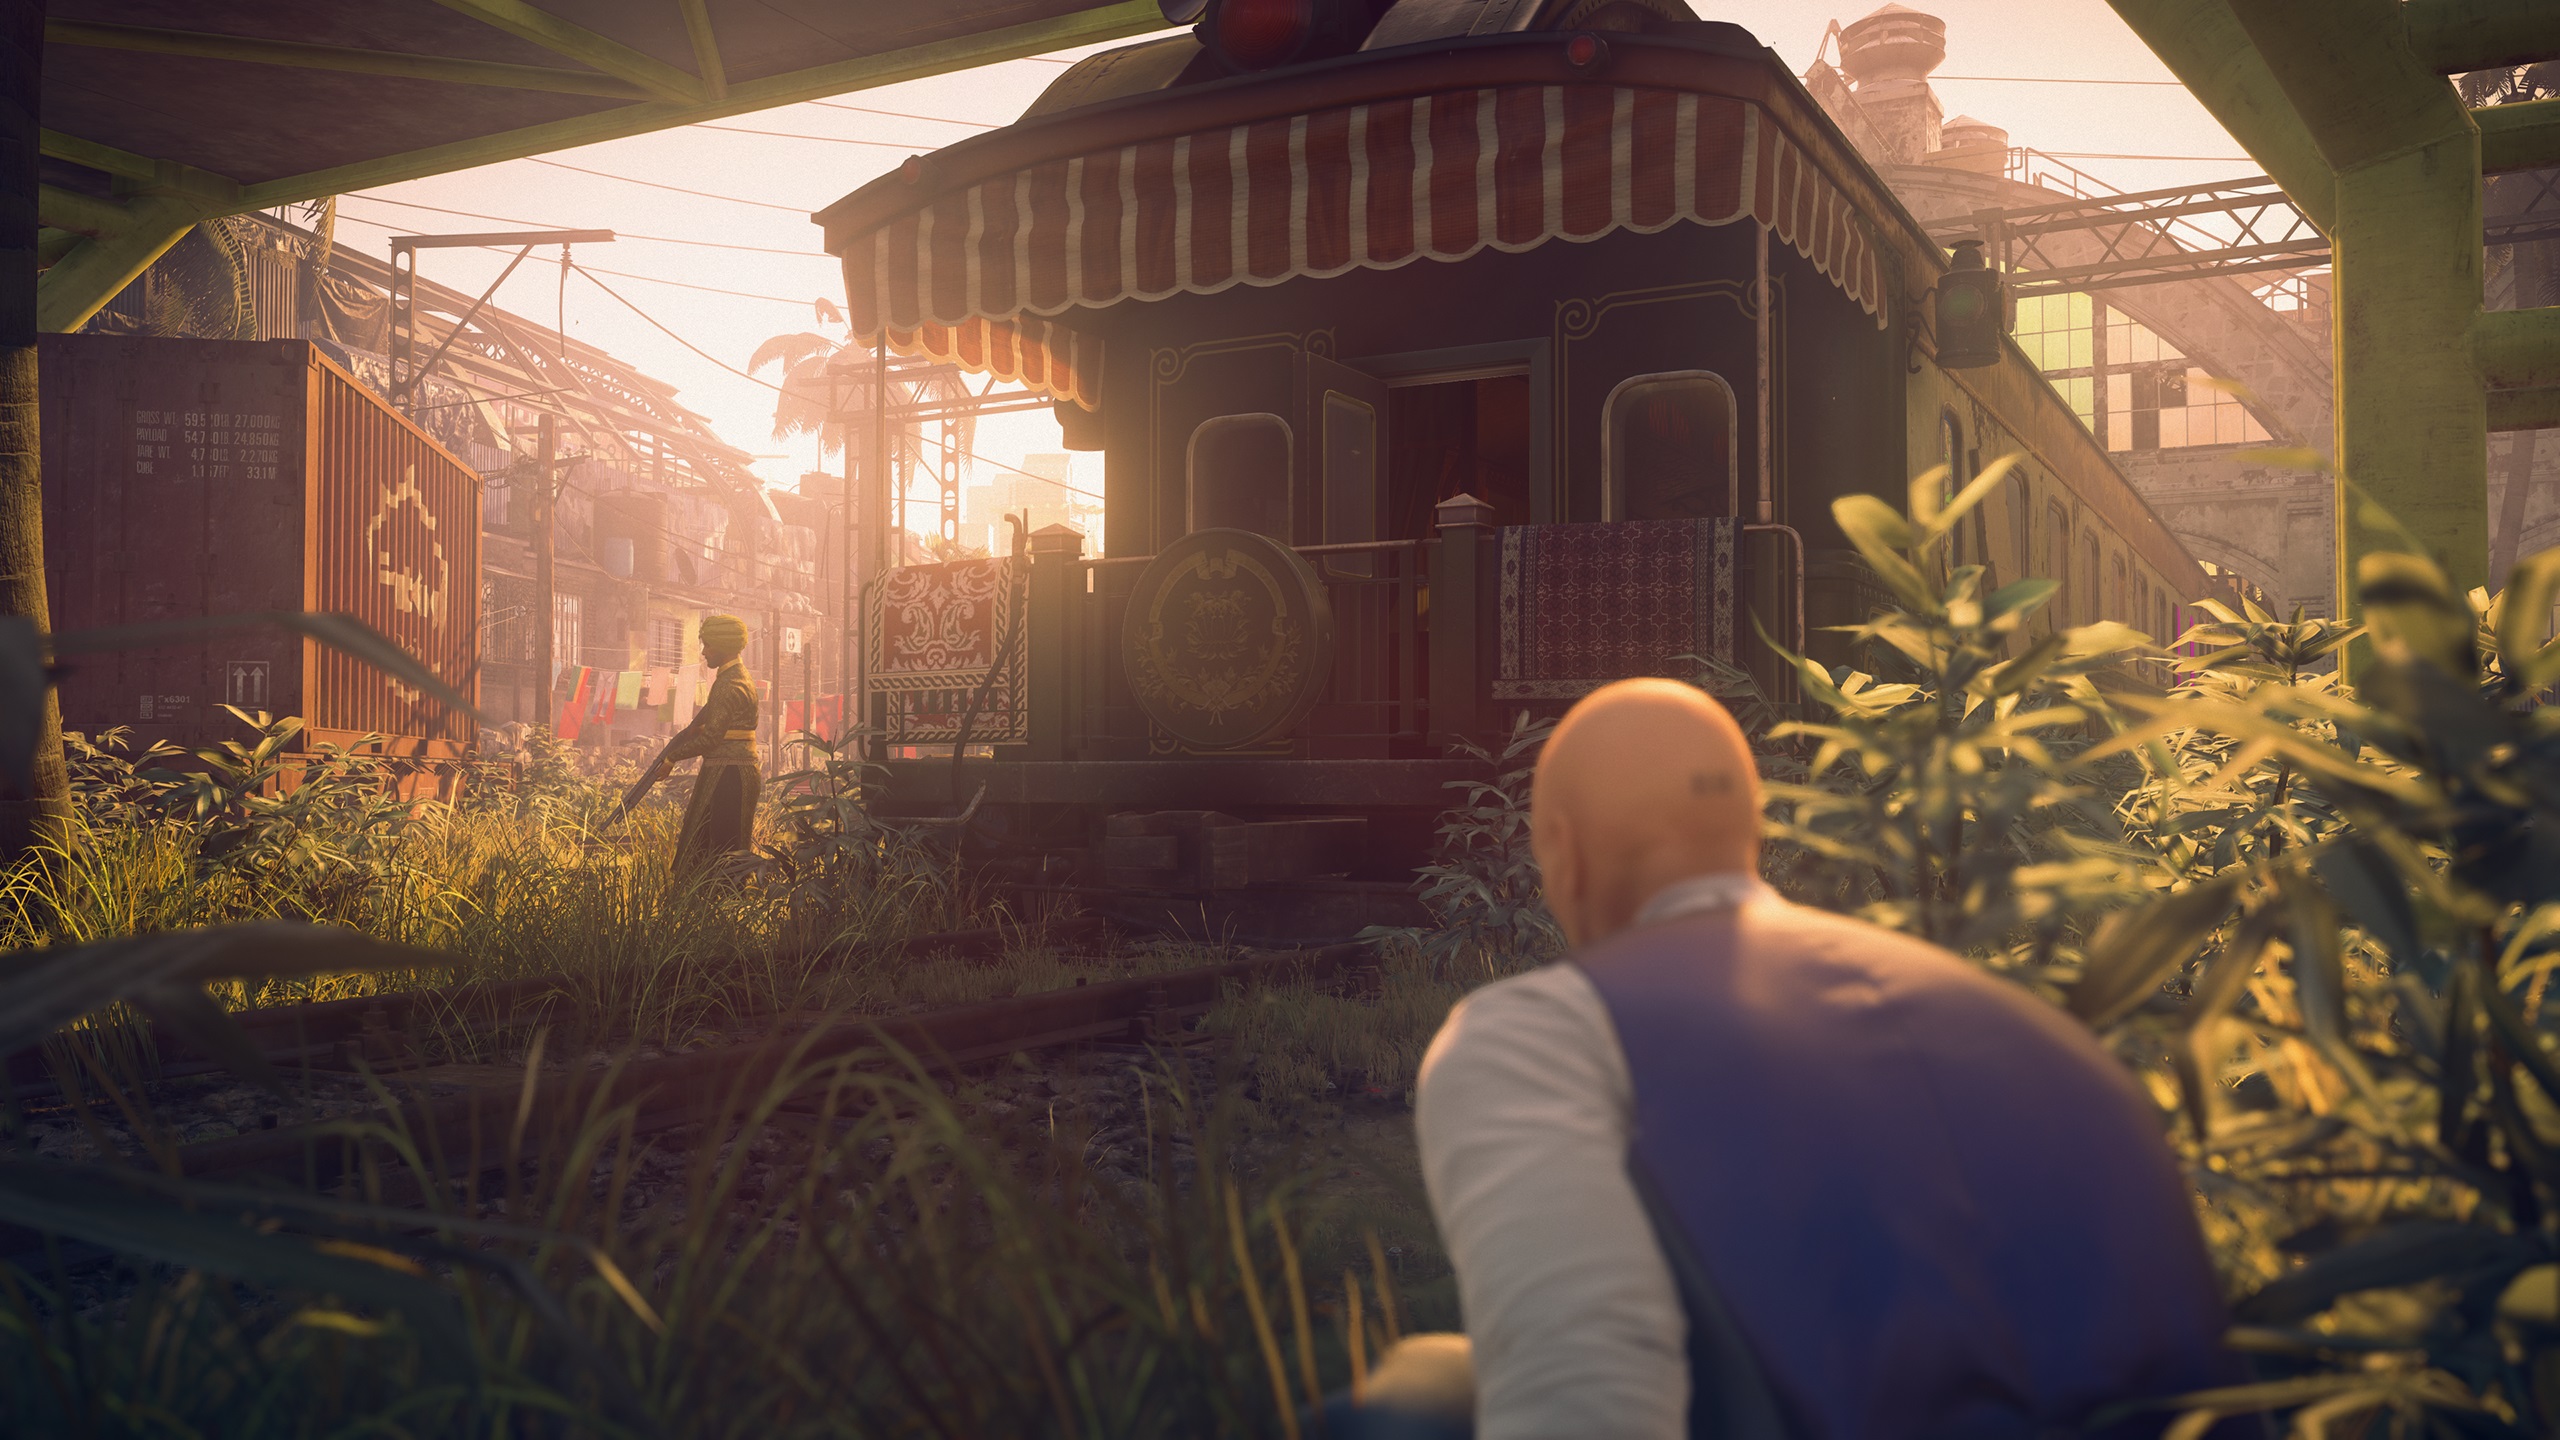 The newest installment in the Hitman video game series is just about here.